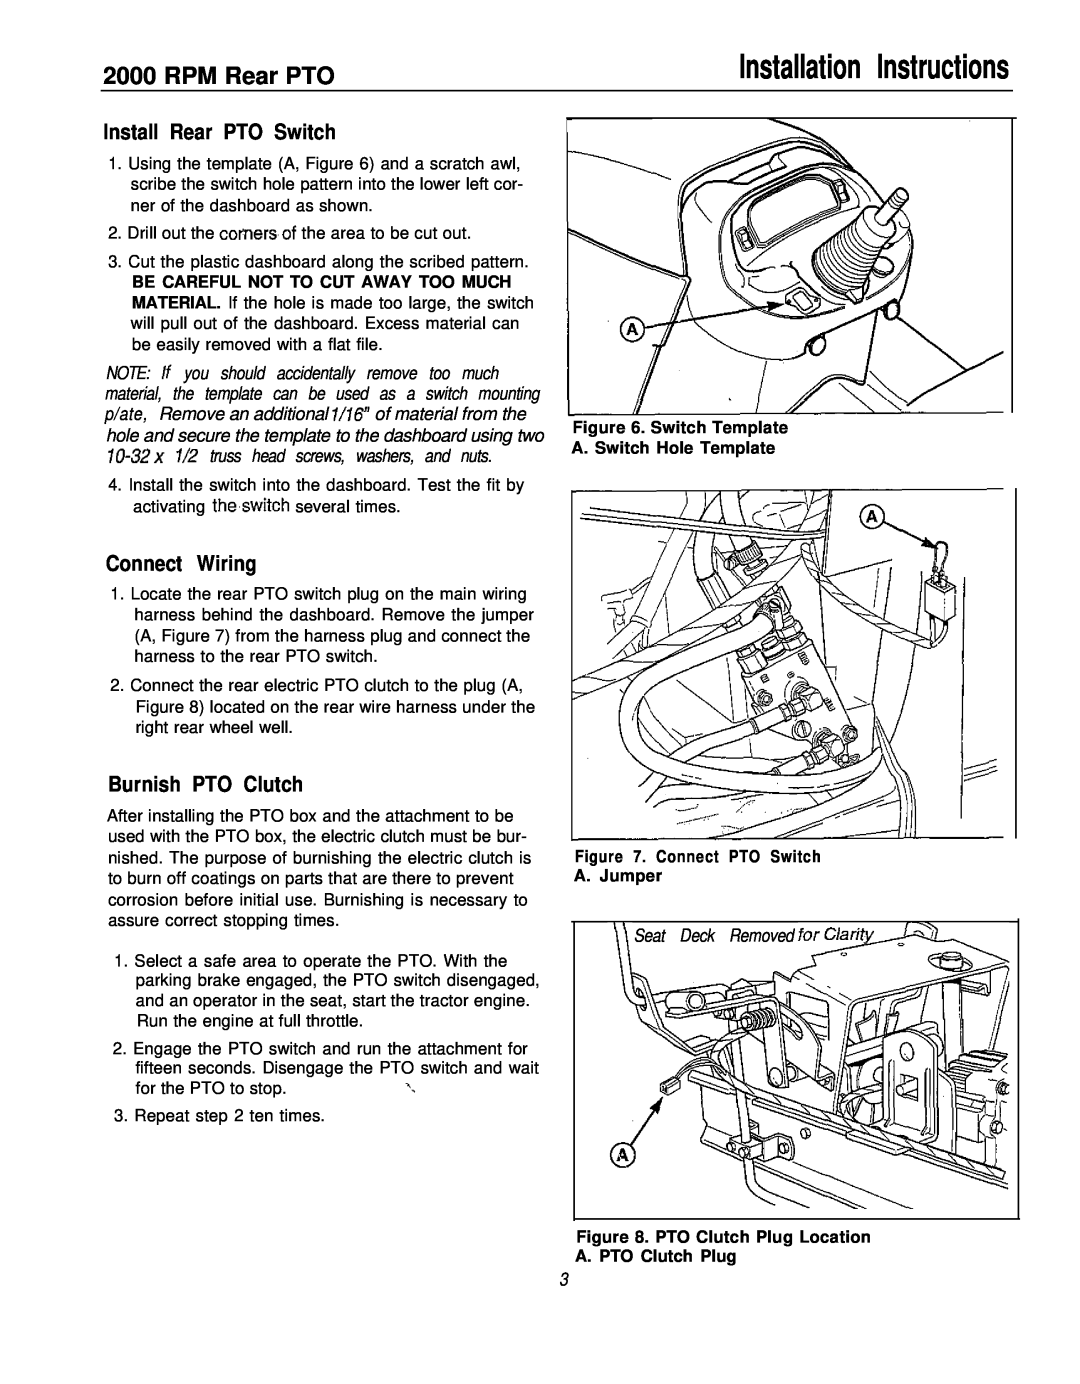 Simplicity 2000 Series Installation Instructions, Seat Deck Removed, Switch Template A. Switch Hole Template, RPM Rear PTO 